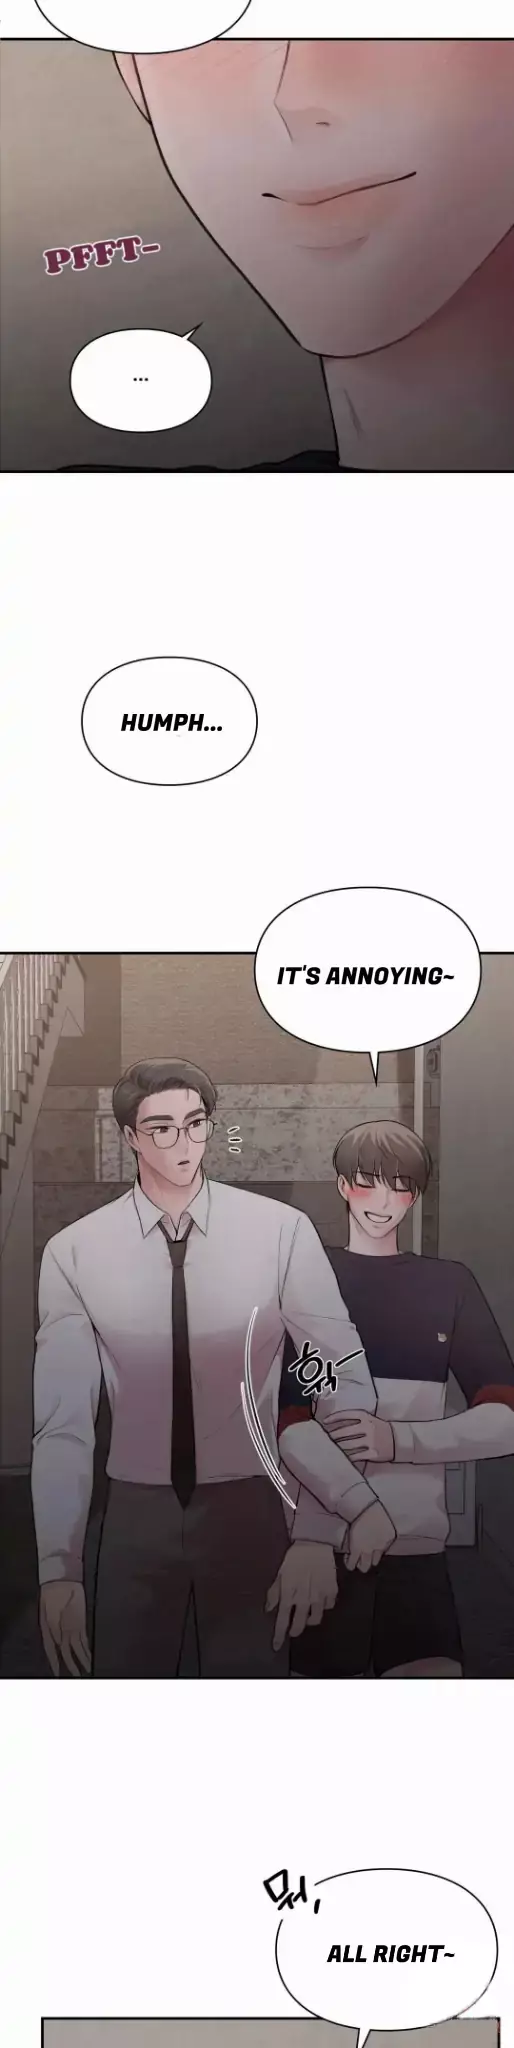 Ideal Type But Kkondae - 5 page 14-1f75deac